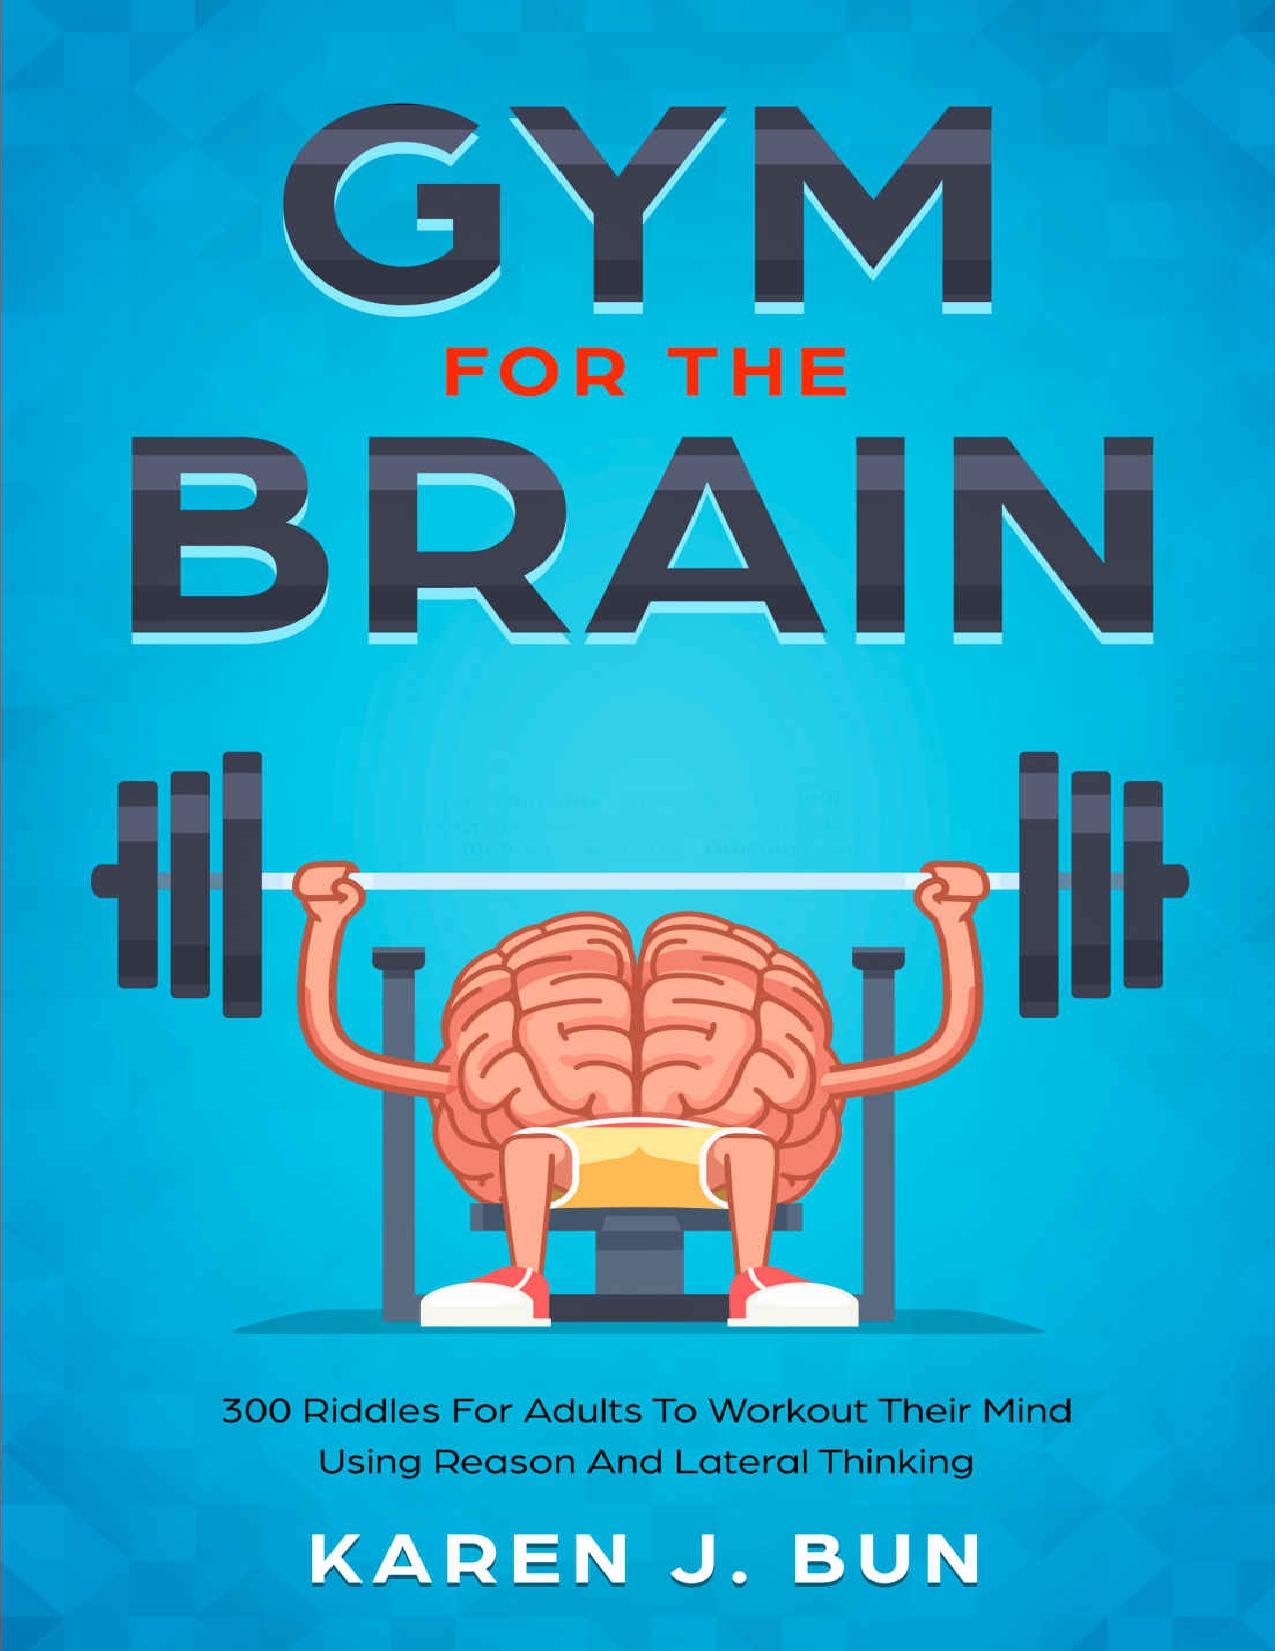 brain gym exercises for adults